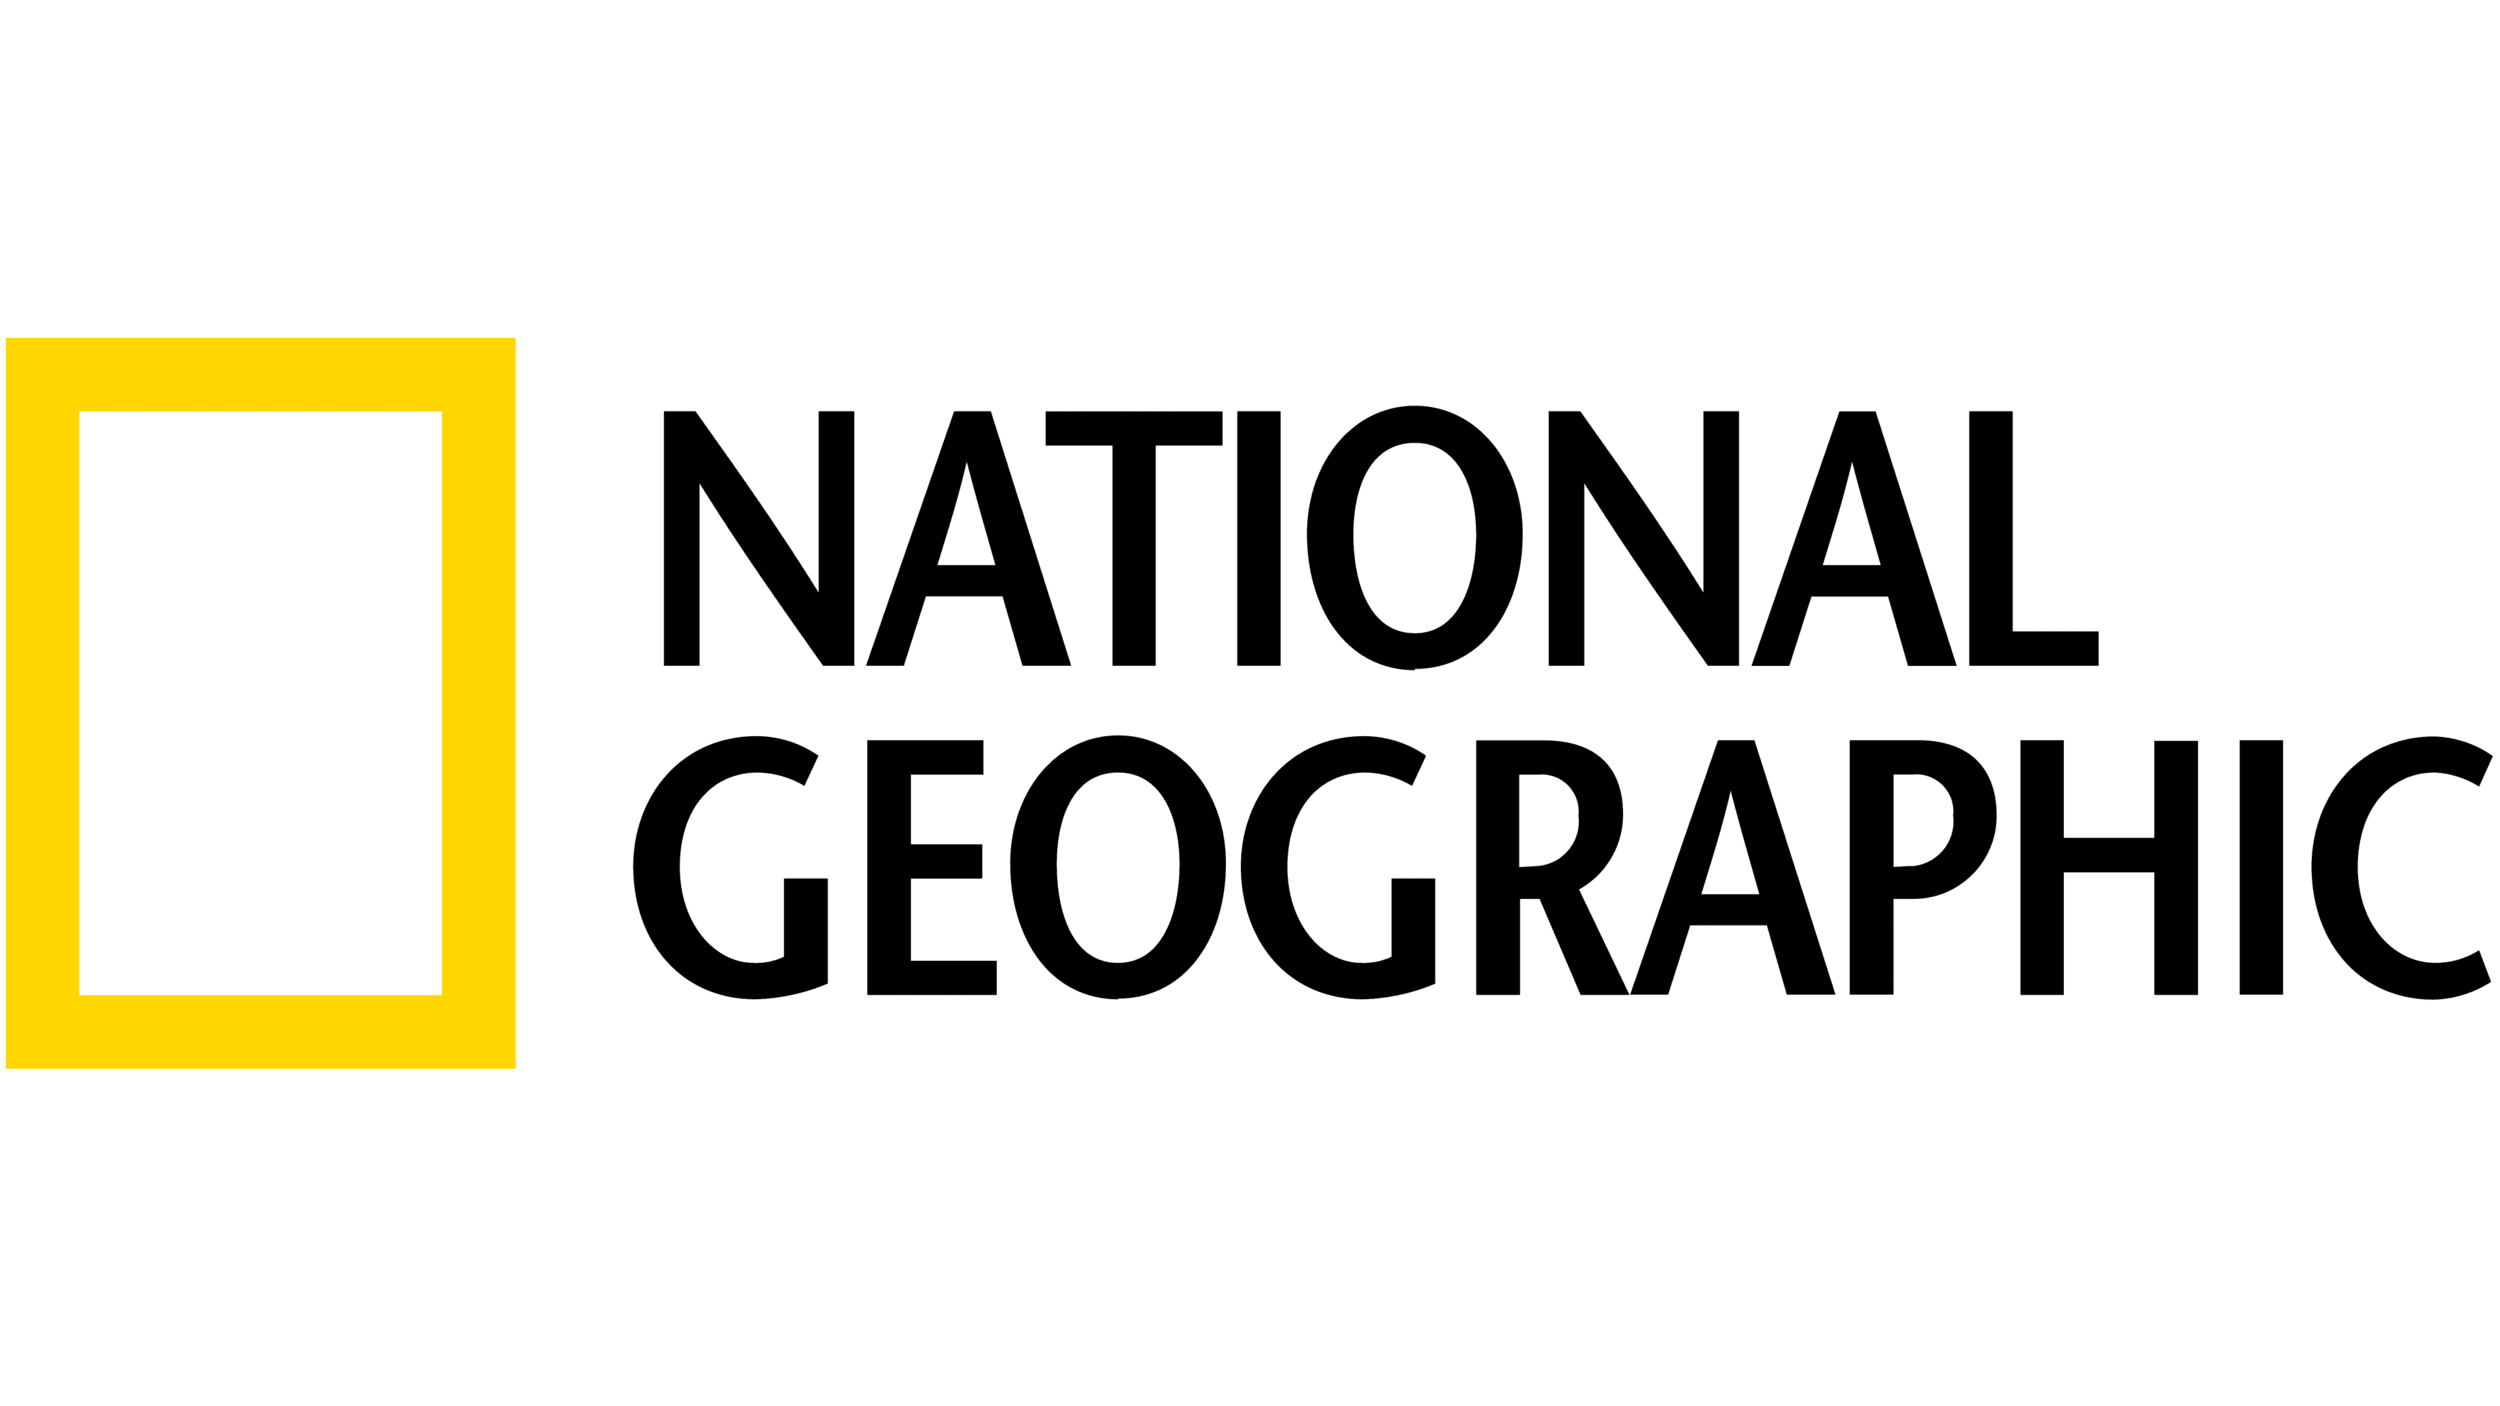 National-Geographic-logo (1).png